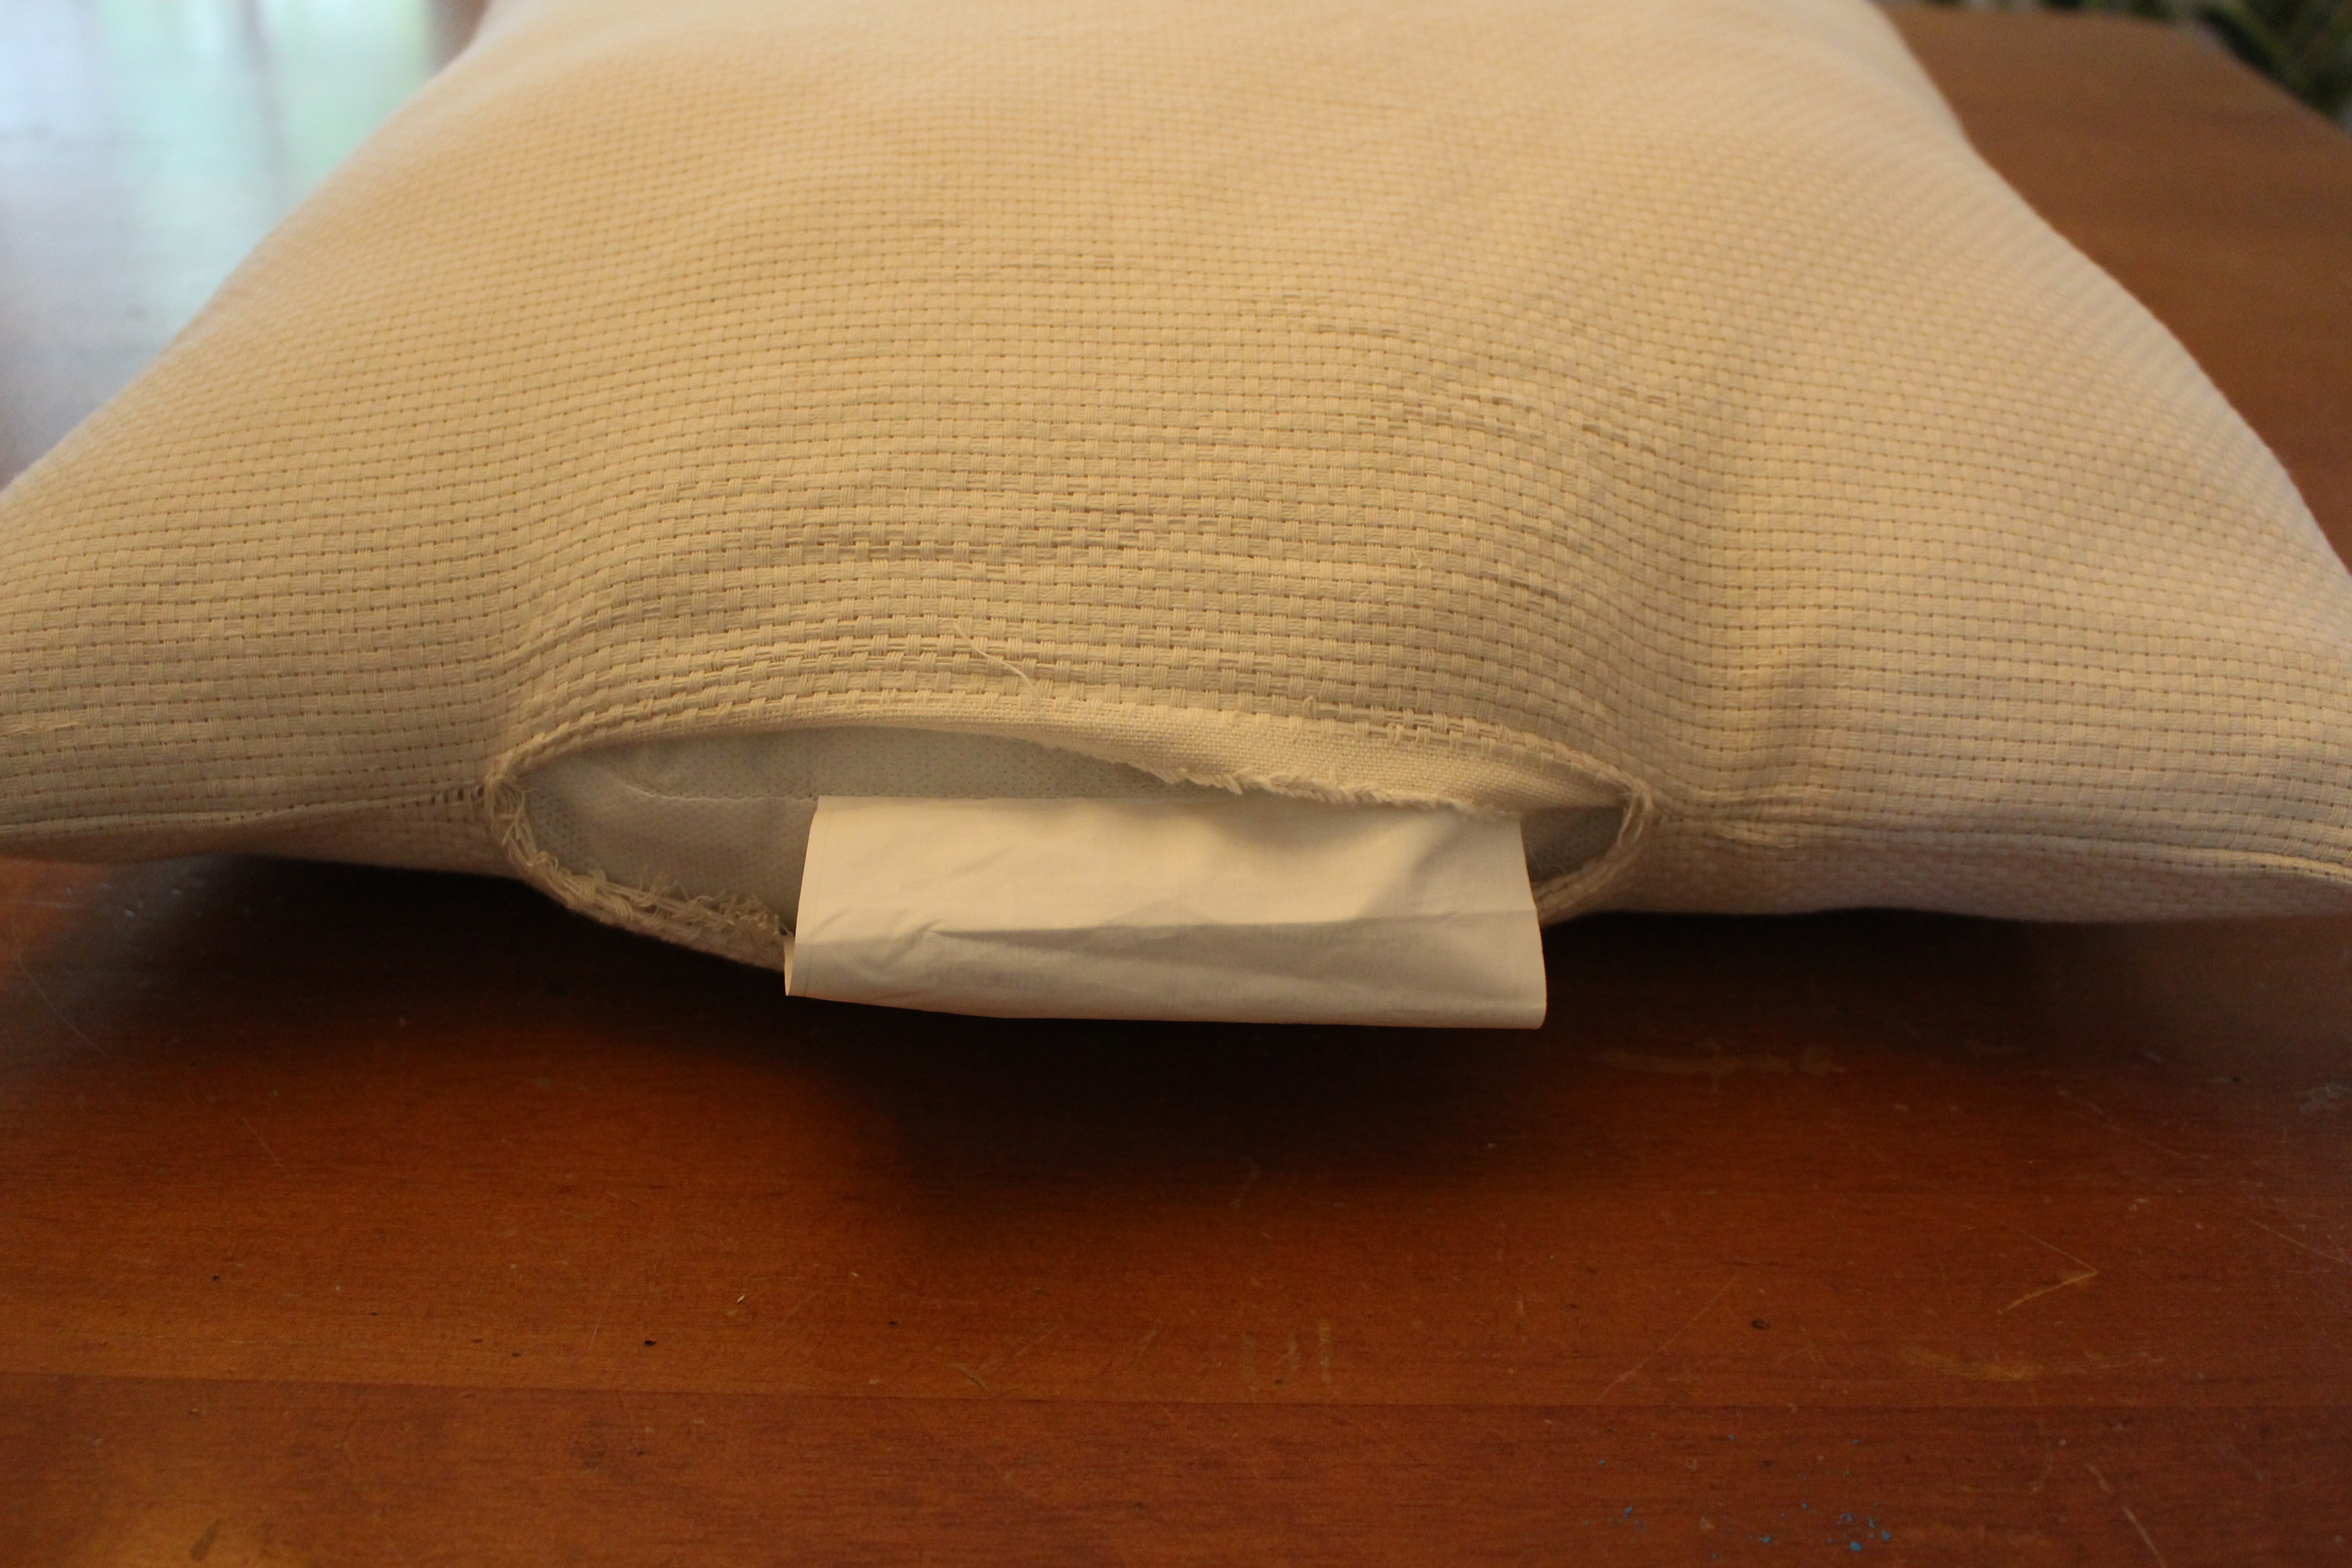 Leave a small opening for inserting your pillow by www.whitecottagehomeandliving.com